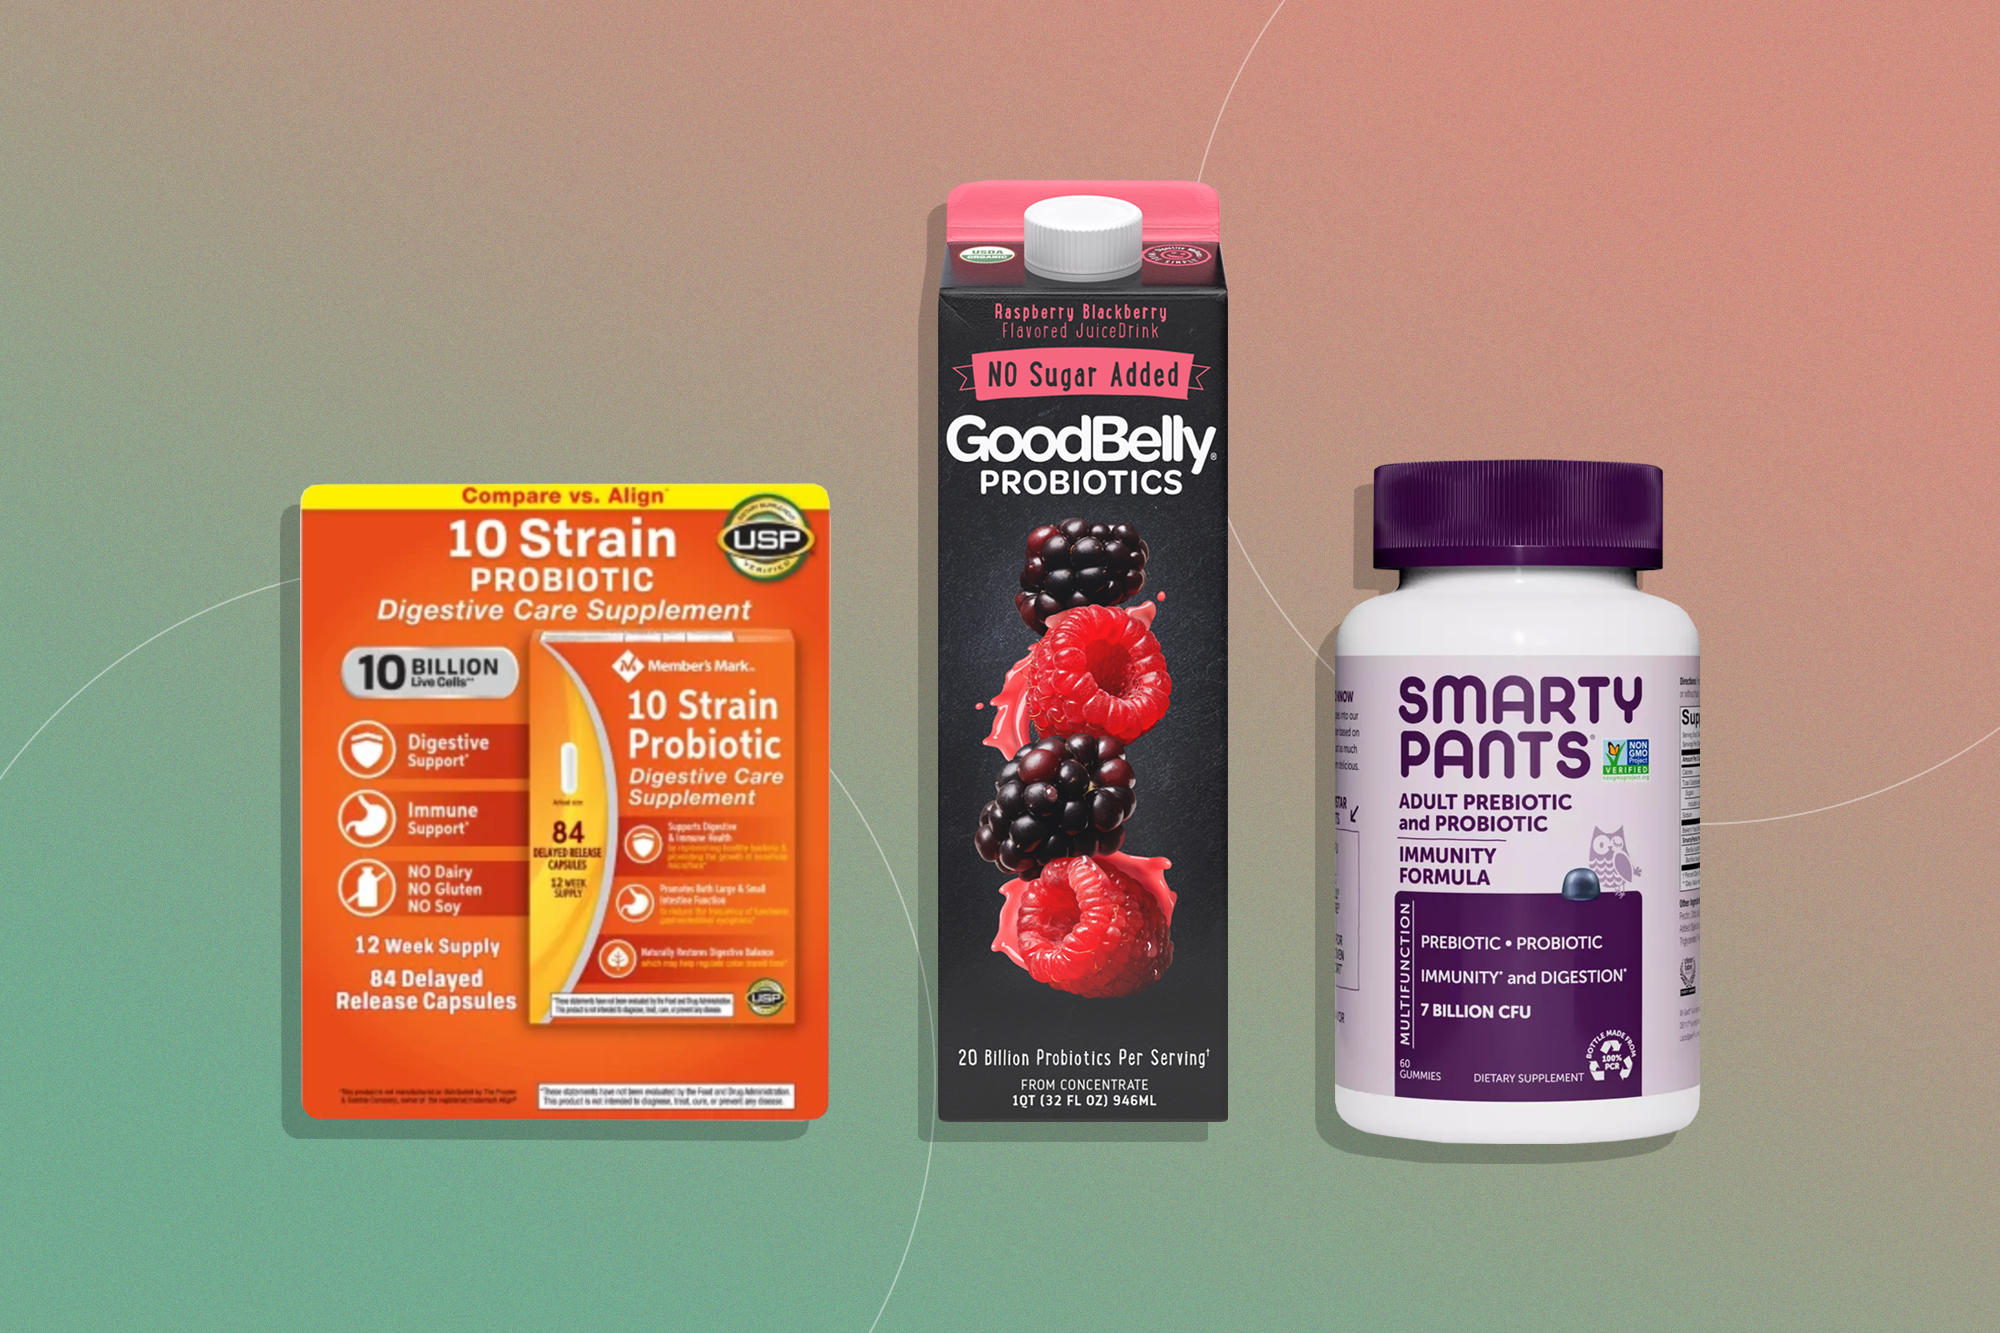 GoodBelly KIDS!, GoodBelly Immune Support